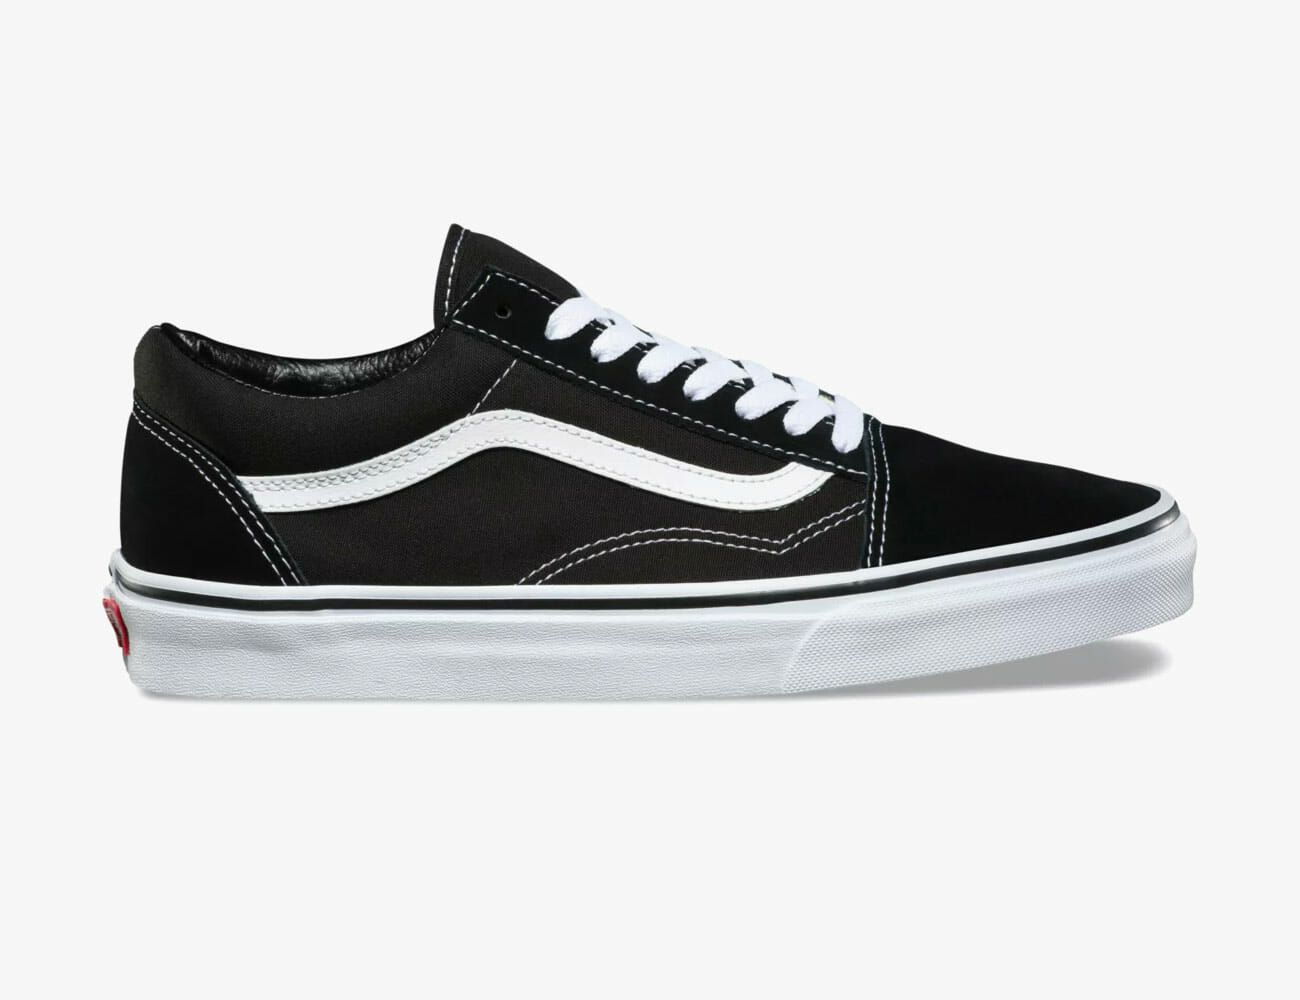 ervaring Imitatie kern Why Are Vault by Vans Sneakers More Expensive Than Vans Classics?